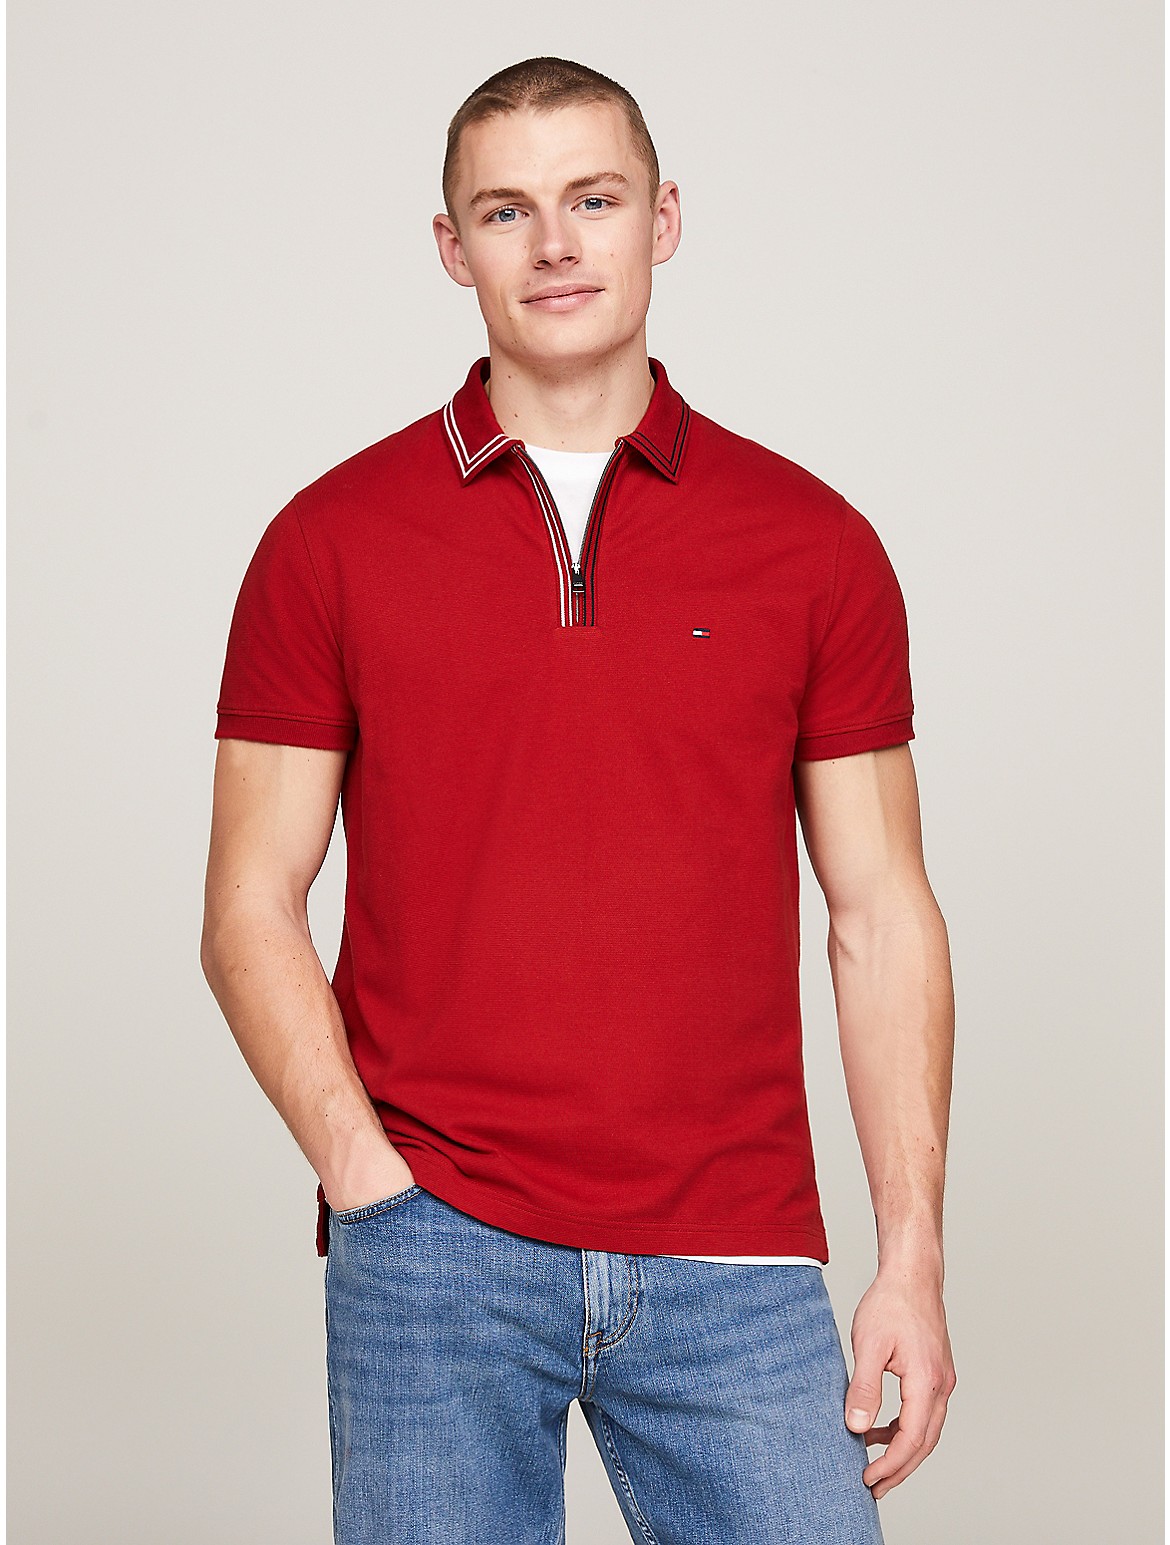 Tommy Hilfiger Men's Regular Fit Tipped Zip Polo